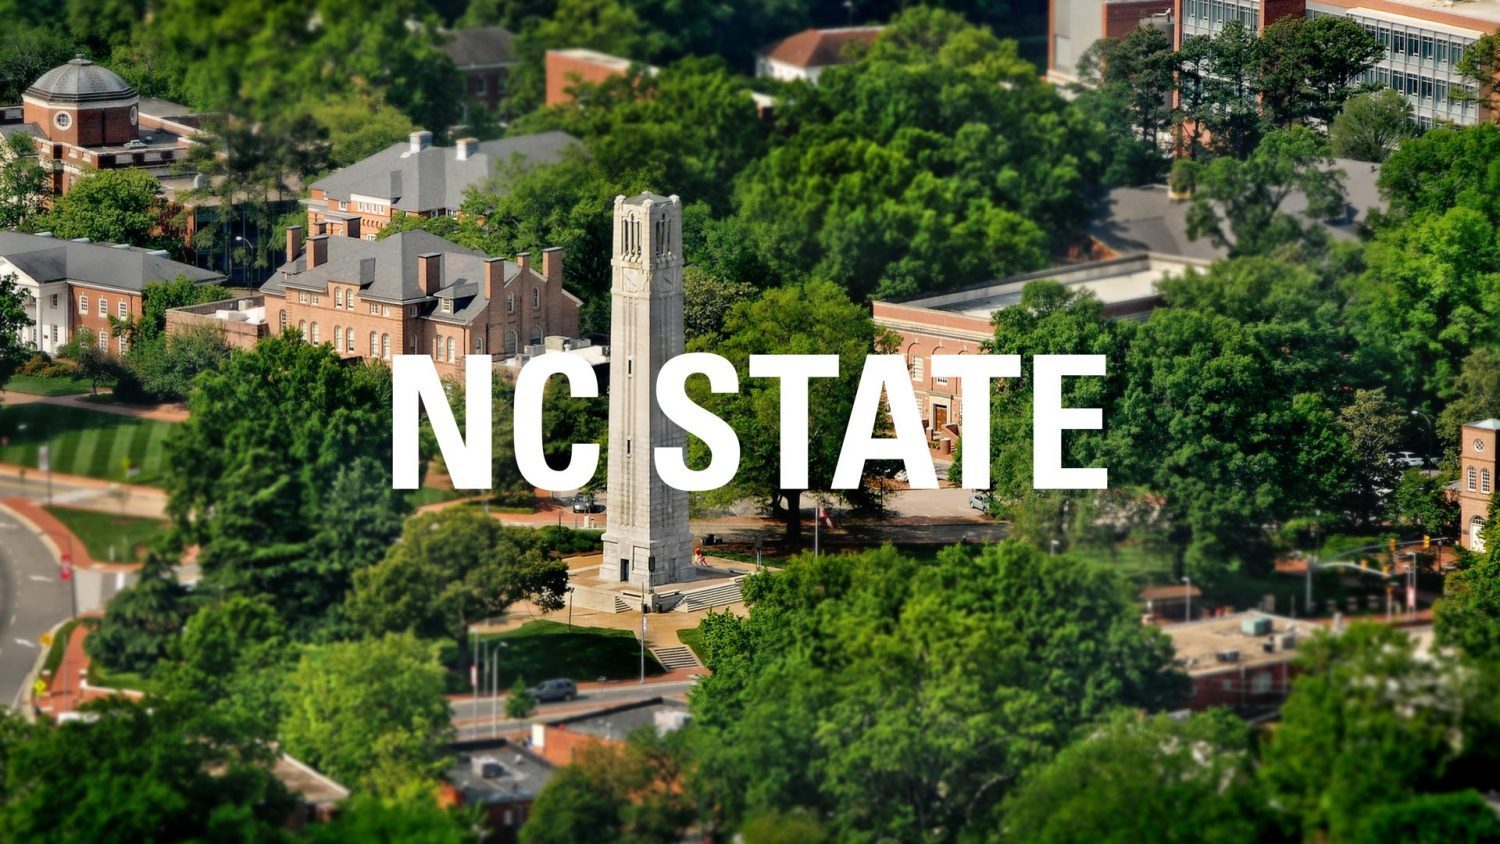 Aerial of campus with the text "NC State" across image.